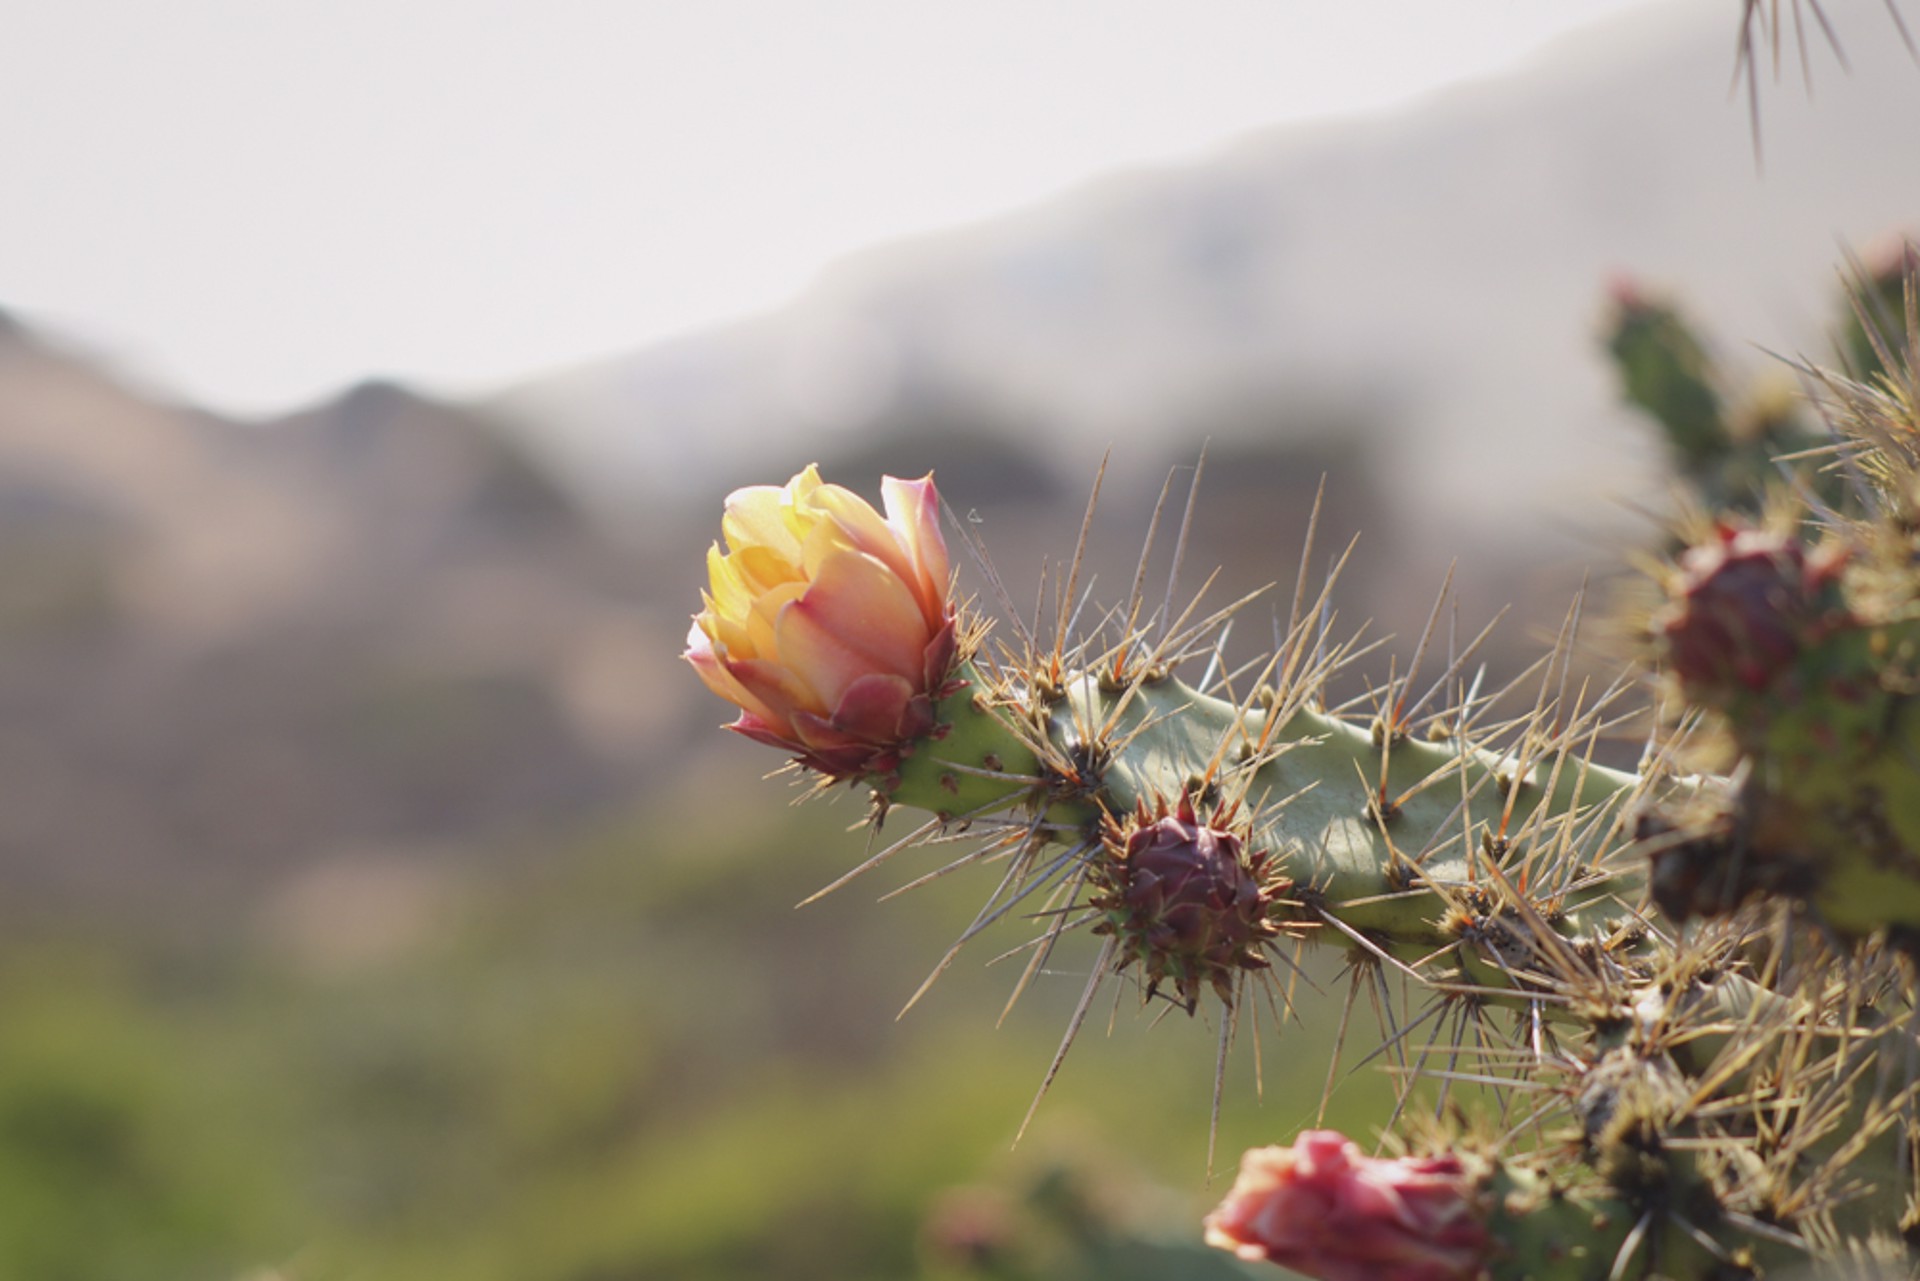 Cactus Blossom by Melina Velleman